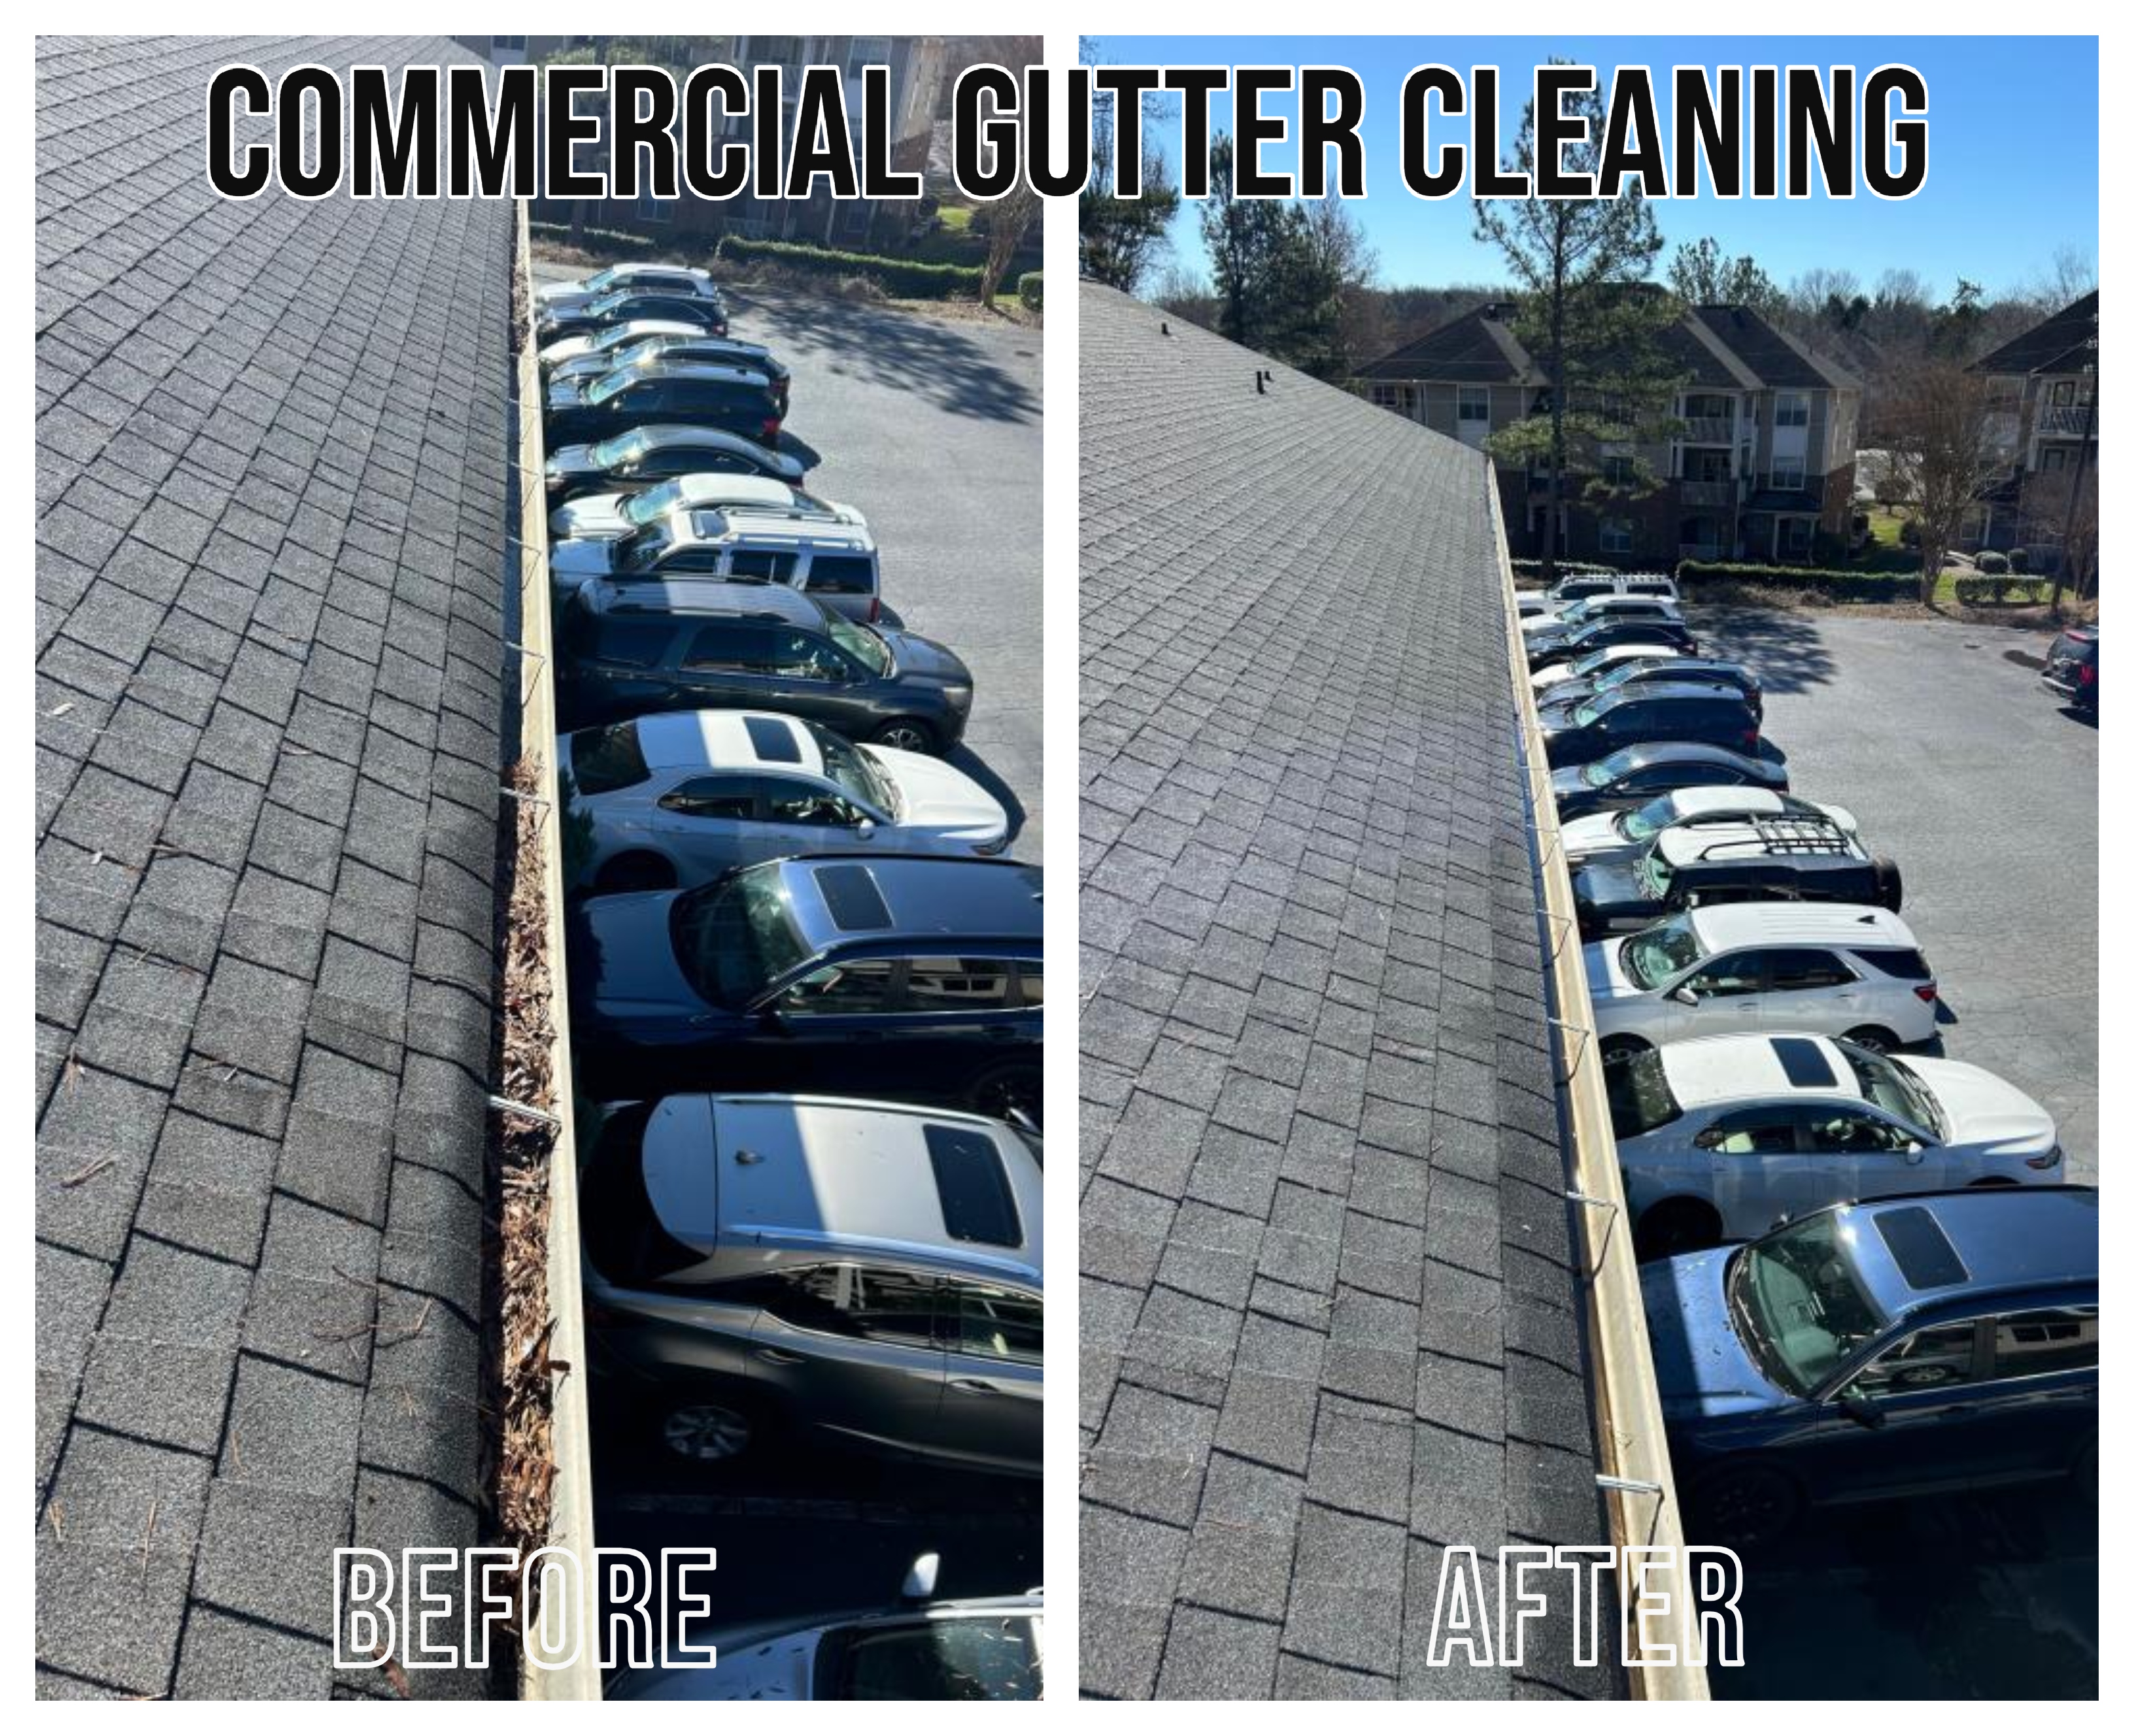 Premium Commercial Gutter Cleaning in Charlotte, NC!